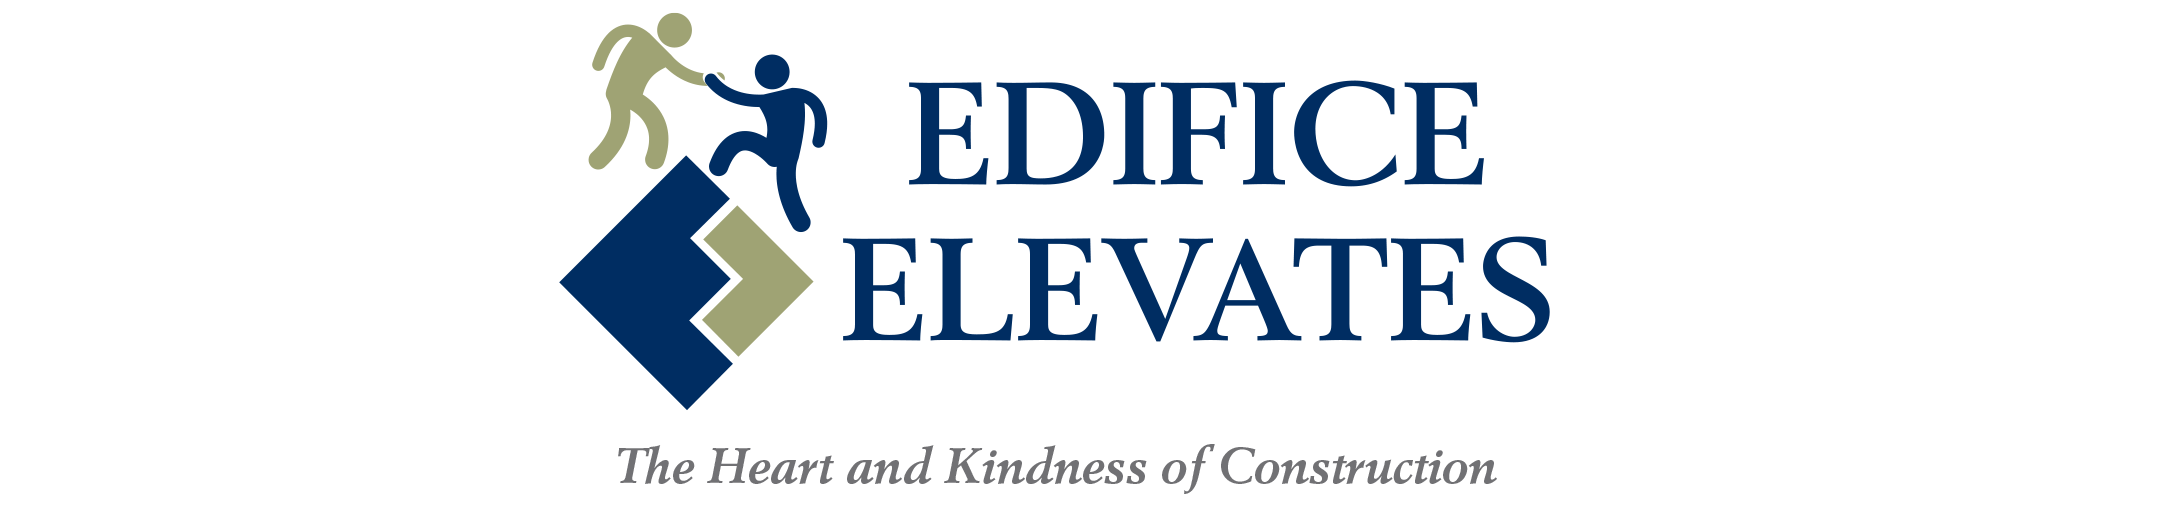 EDIFICE Announces Initiative Focused on Lifting Up Those in Need